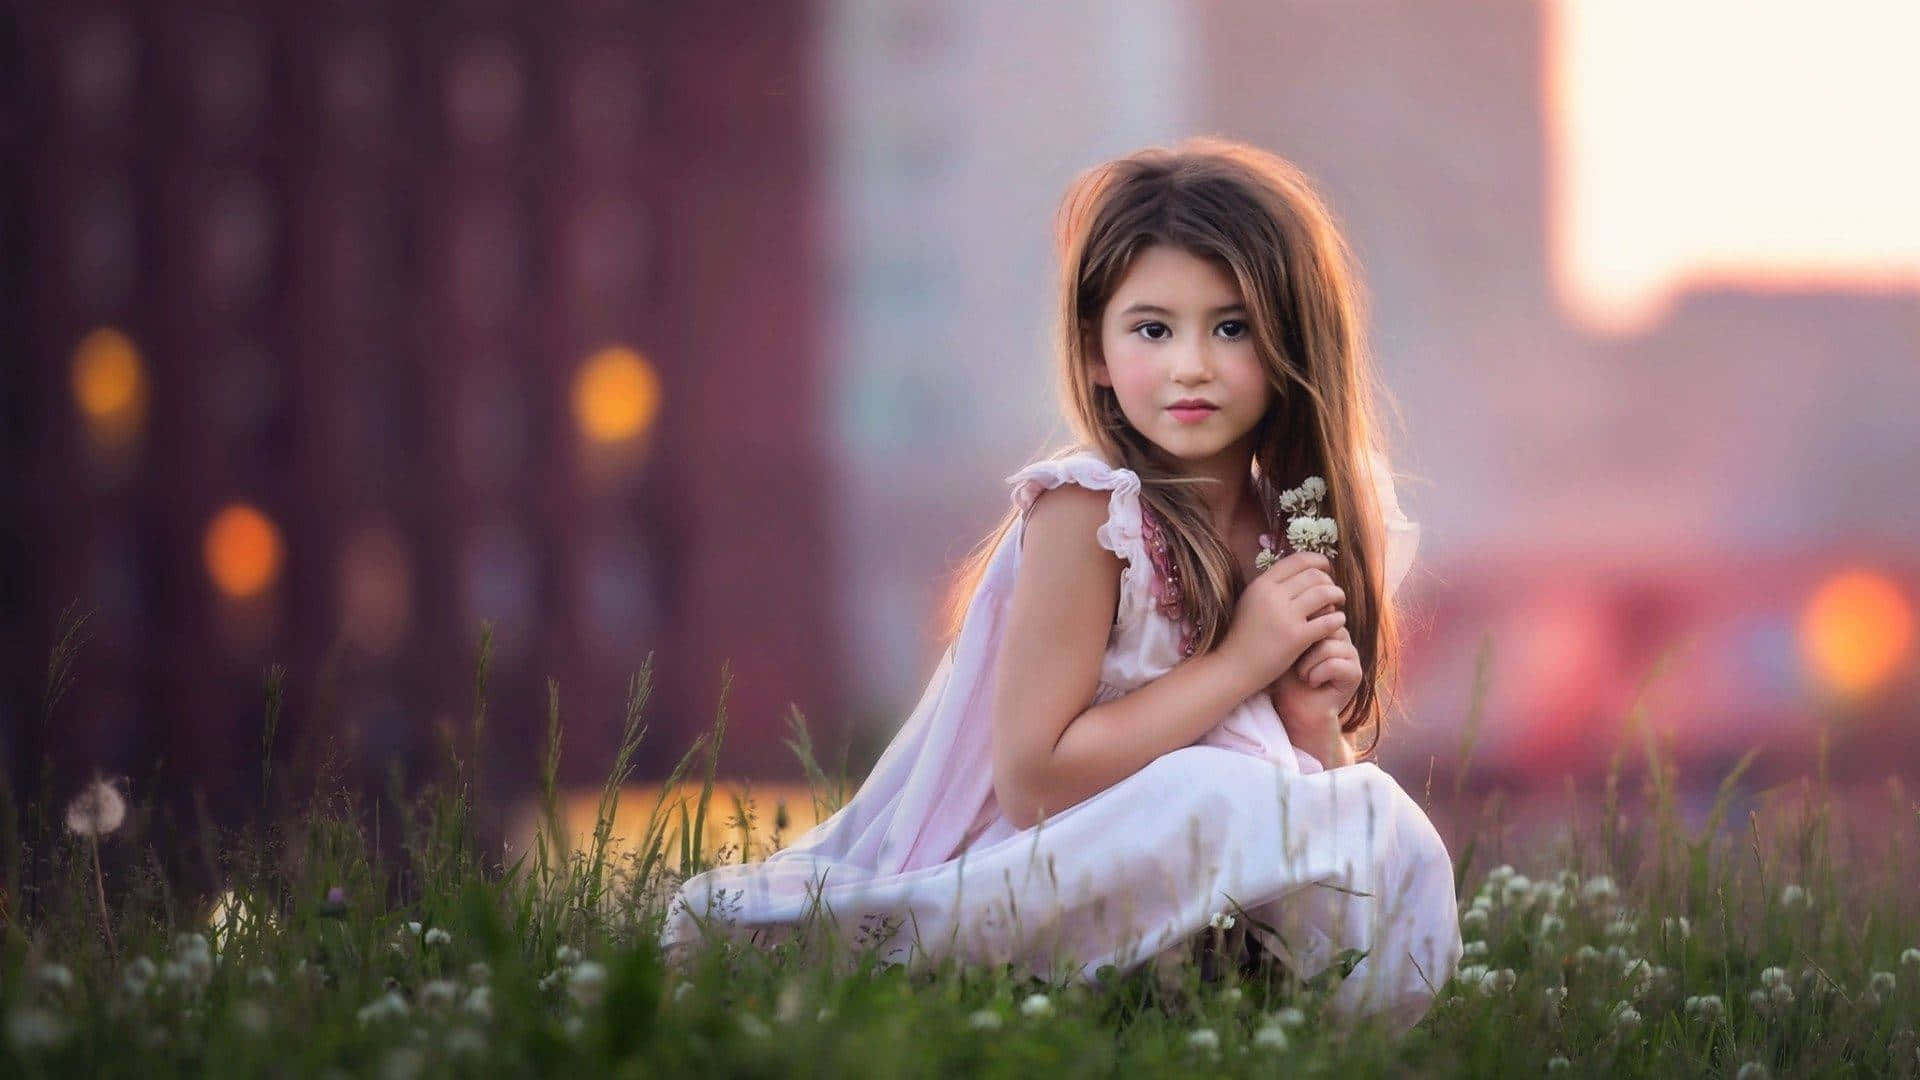 A Little Girl Sitting In The Grass With A City In The Background Wallpaper